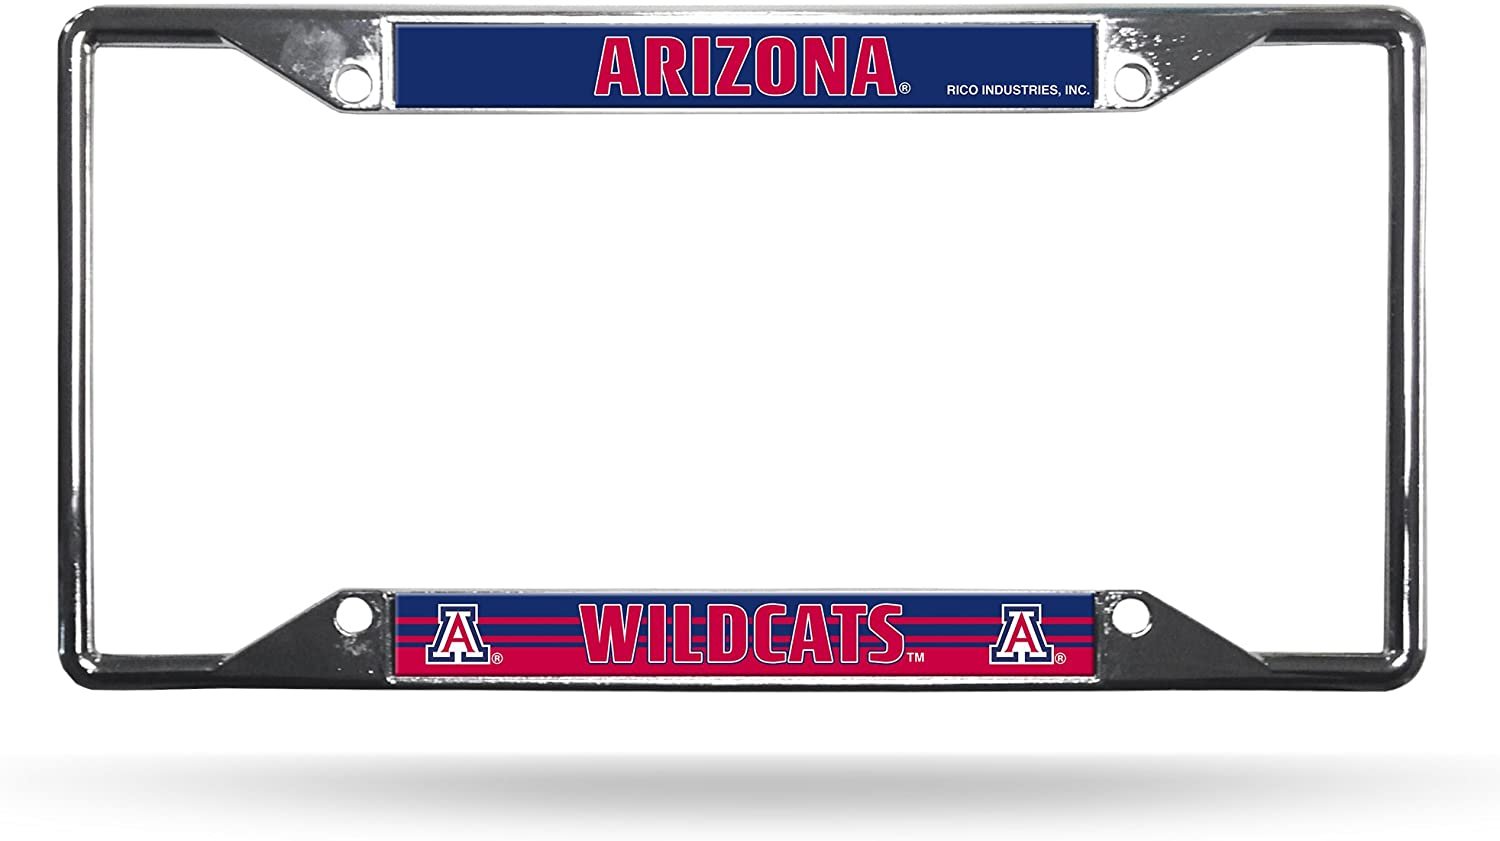 University of Arizona Wildcats Metal License Plate Frame Chrome Tag Cover, EZ View Design, 12x6 Inch